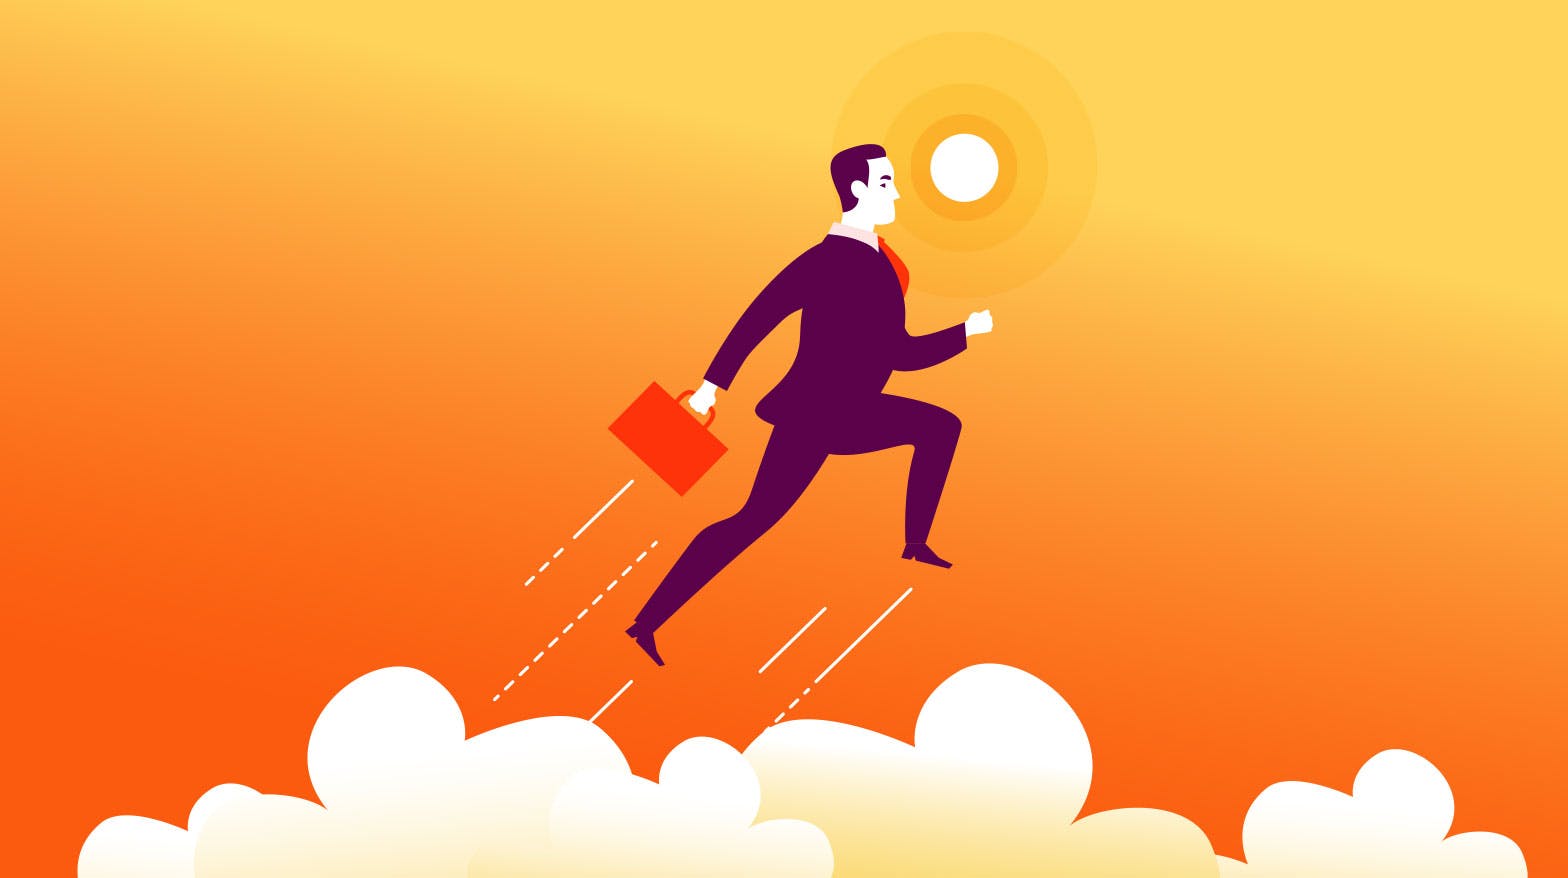 Illustration of a man in a suit leaping out of a cloud